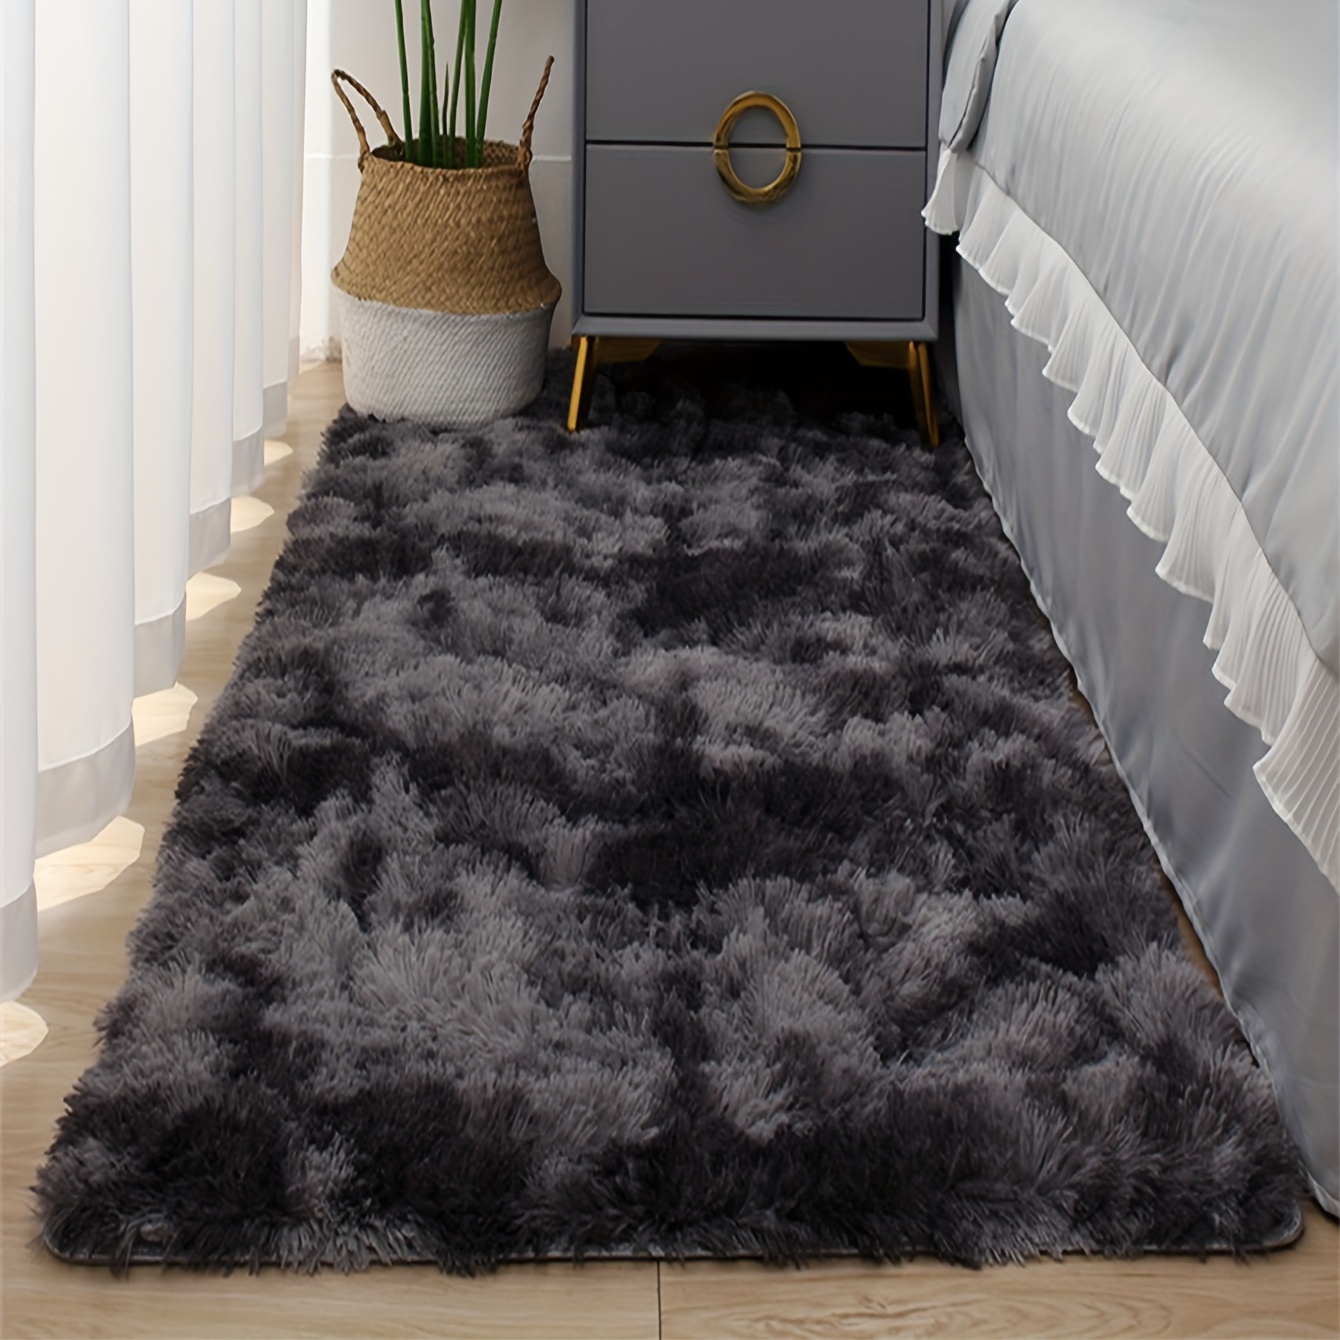 1pc ultra plush soft area rugs for bedroom living room luxury tied dyed fluffy bedside rug washable shag furry carpet non shedding for nursery children kids girls room home decorative rug home decor room decor 27 55 62 99in 70 160cm details 6